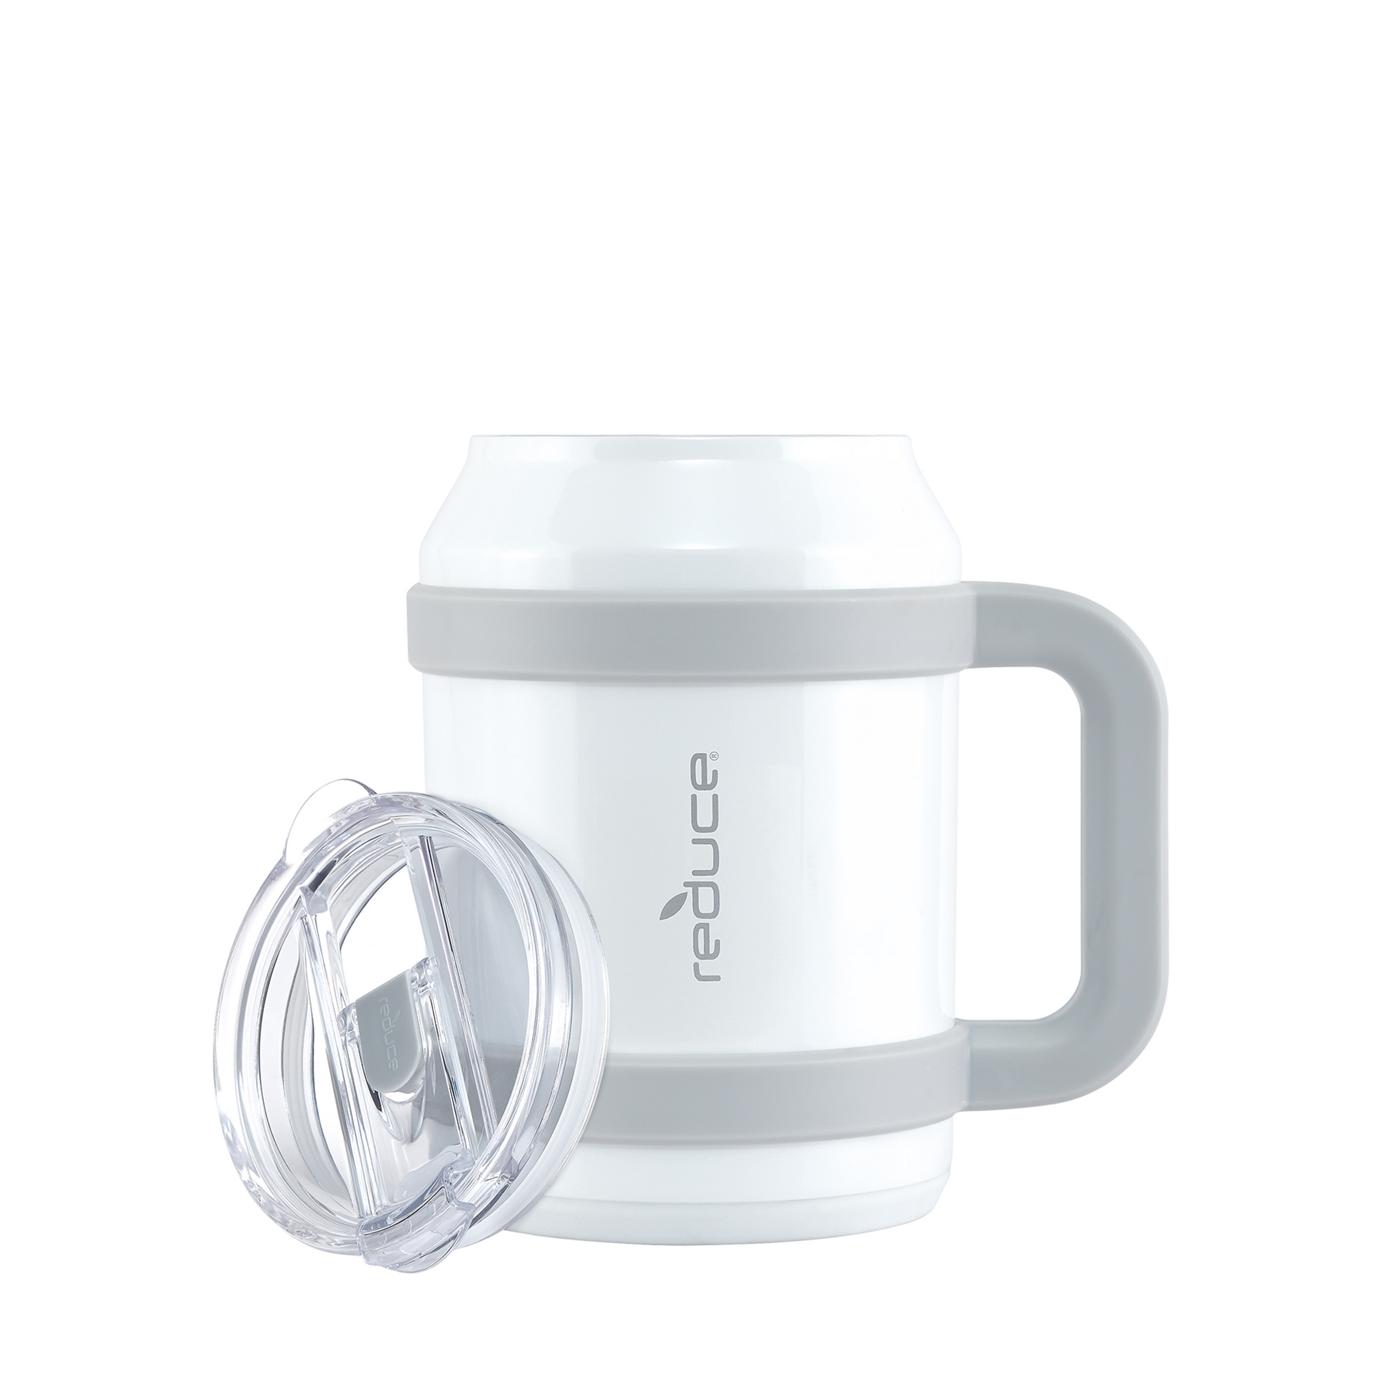 Reduce COLD-1 Stainless Steel Travel Mug, 50 oz - Foods Co.